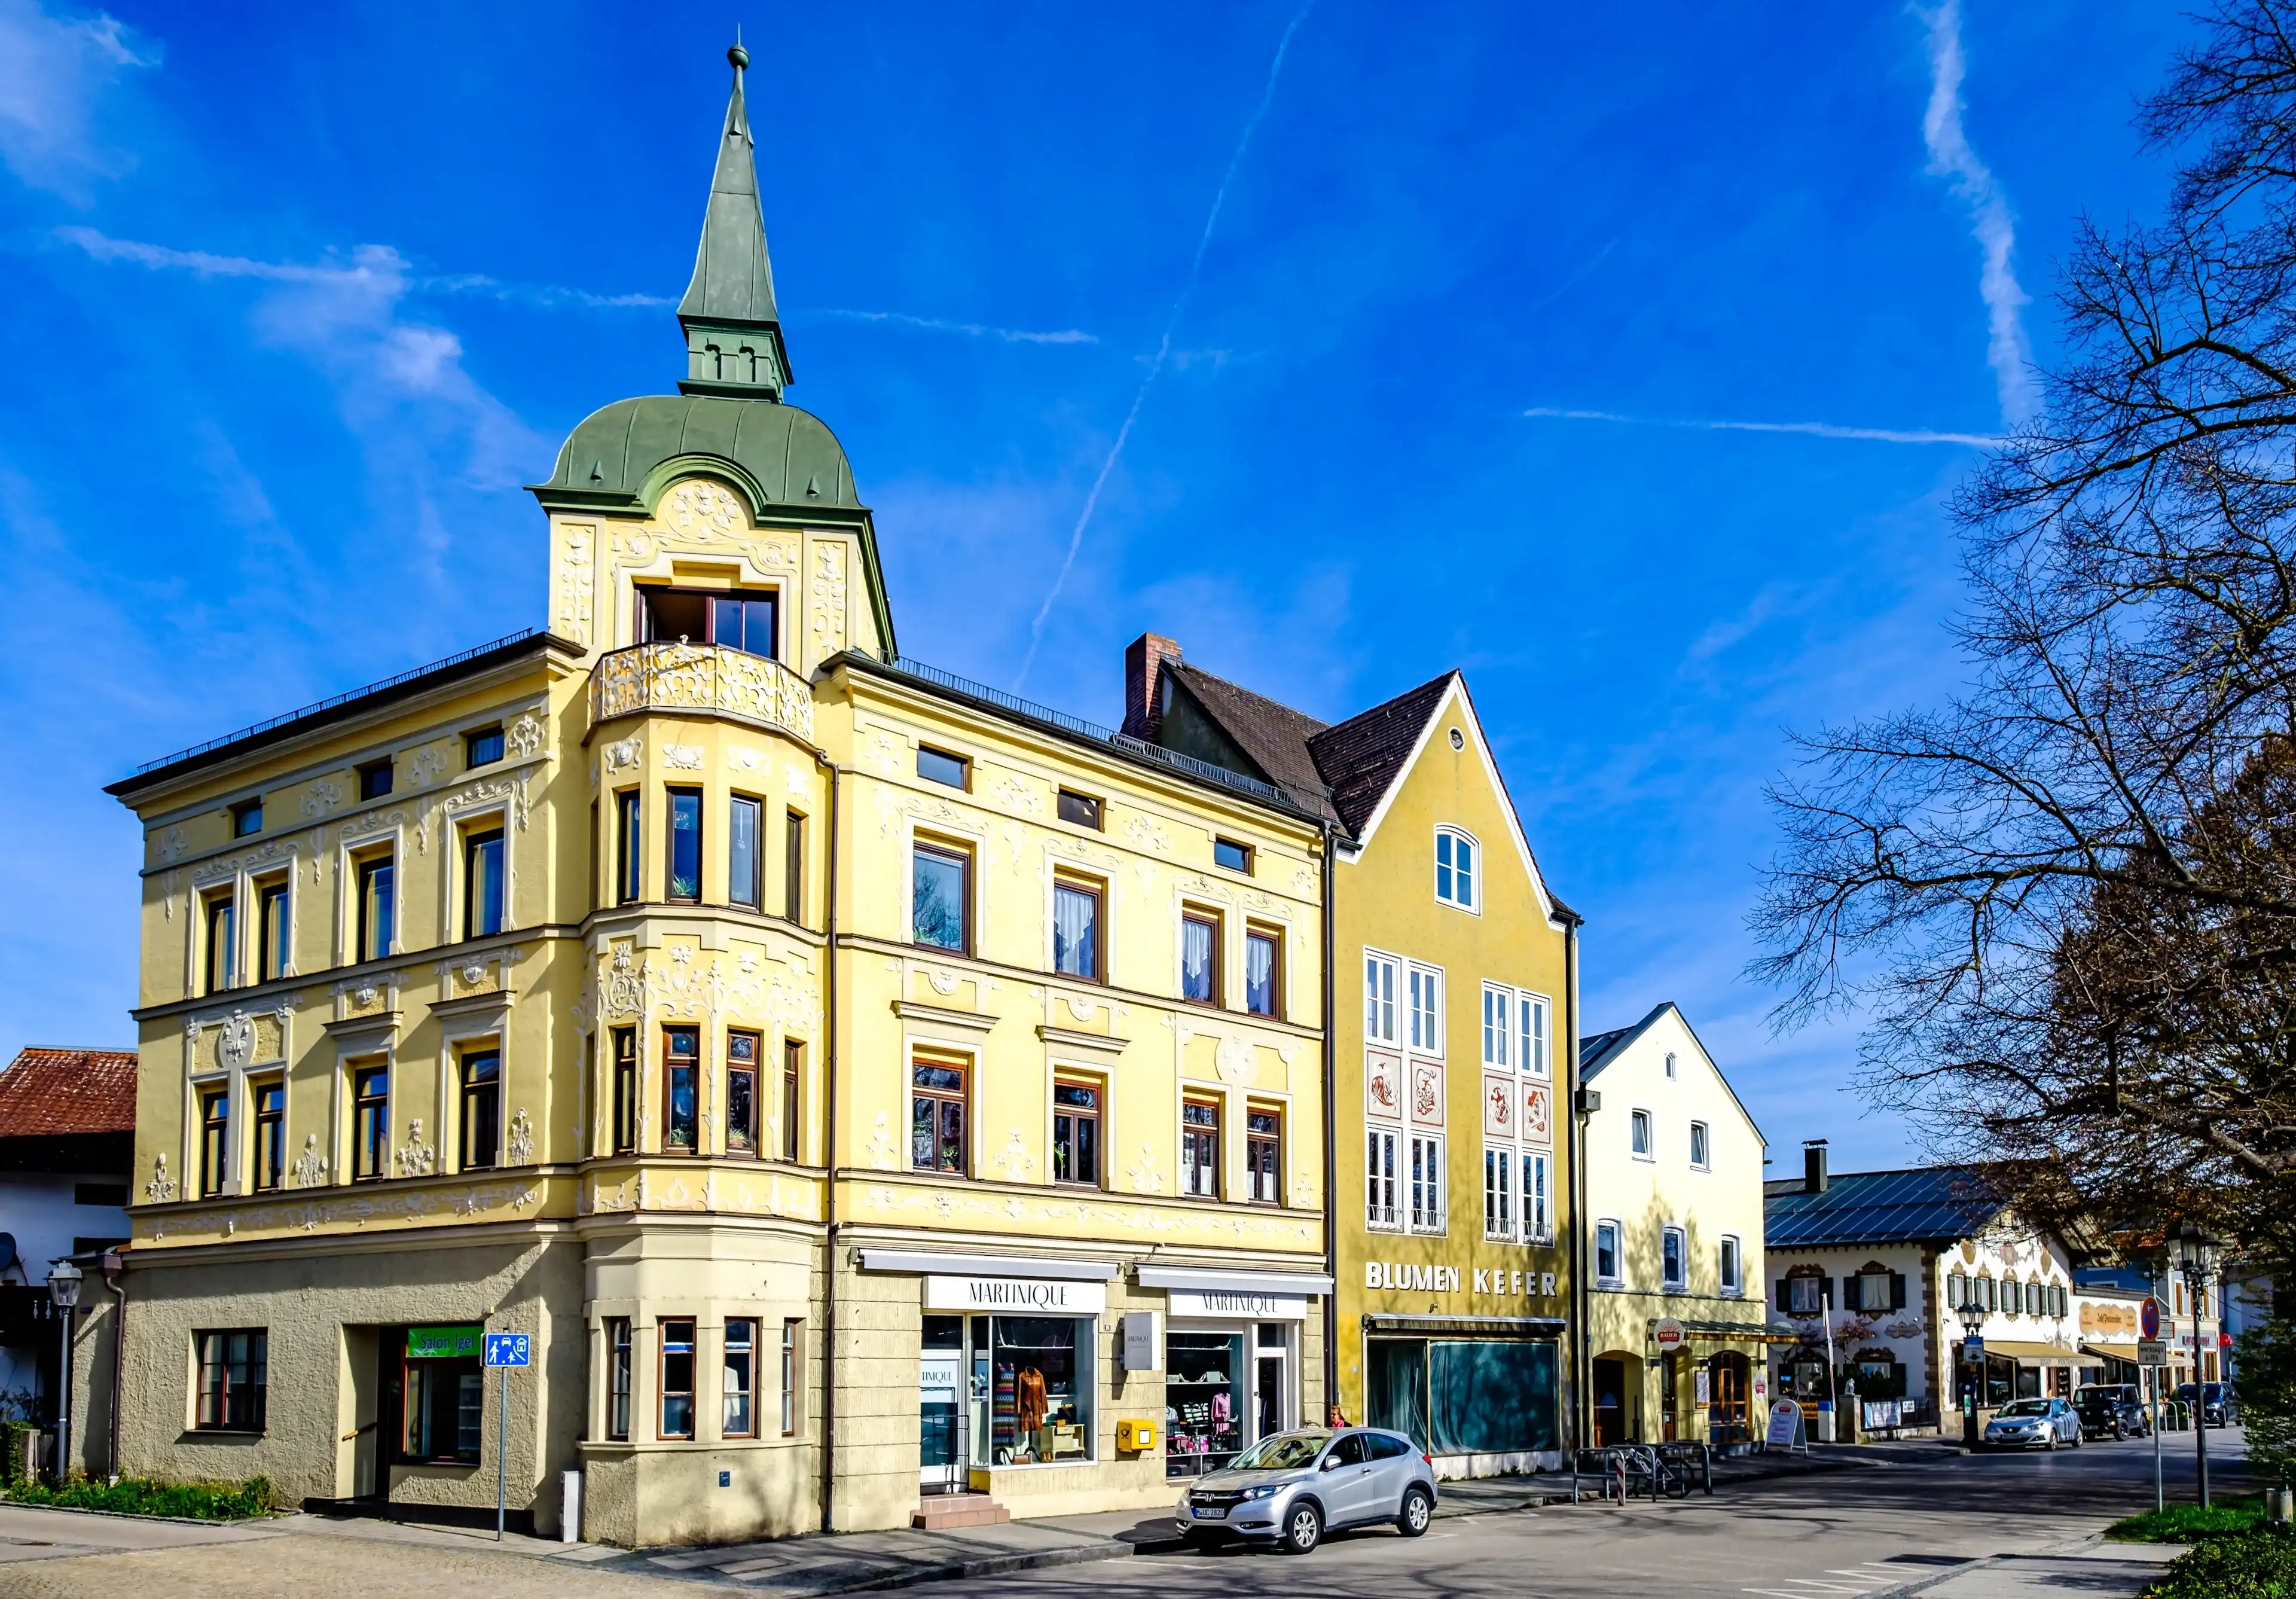 Best Bad Aibling hotels. Cheap hotels in Bad Aibling, Germany